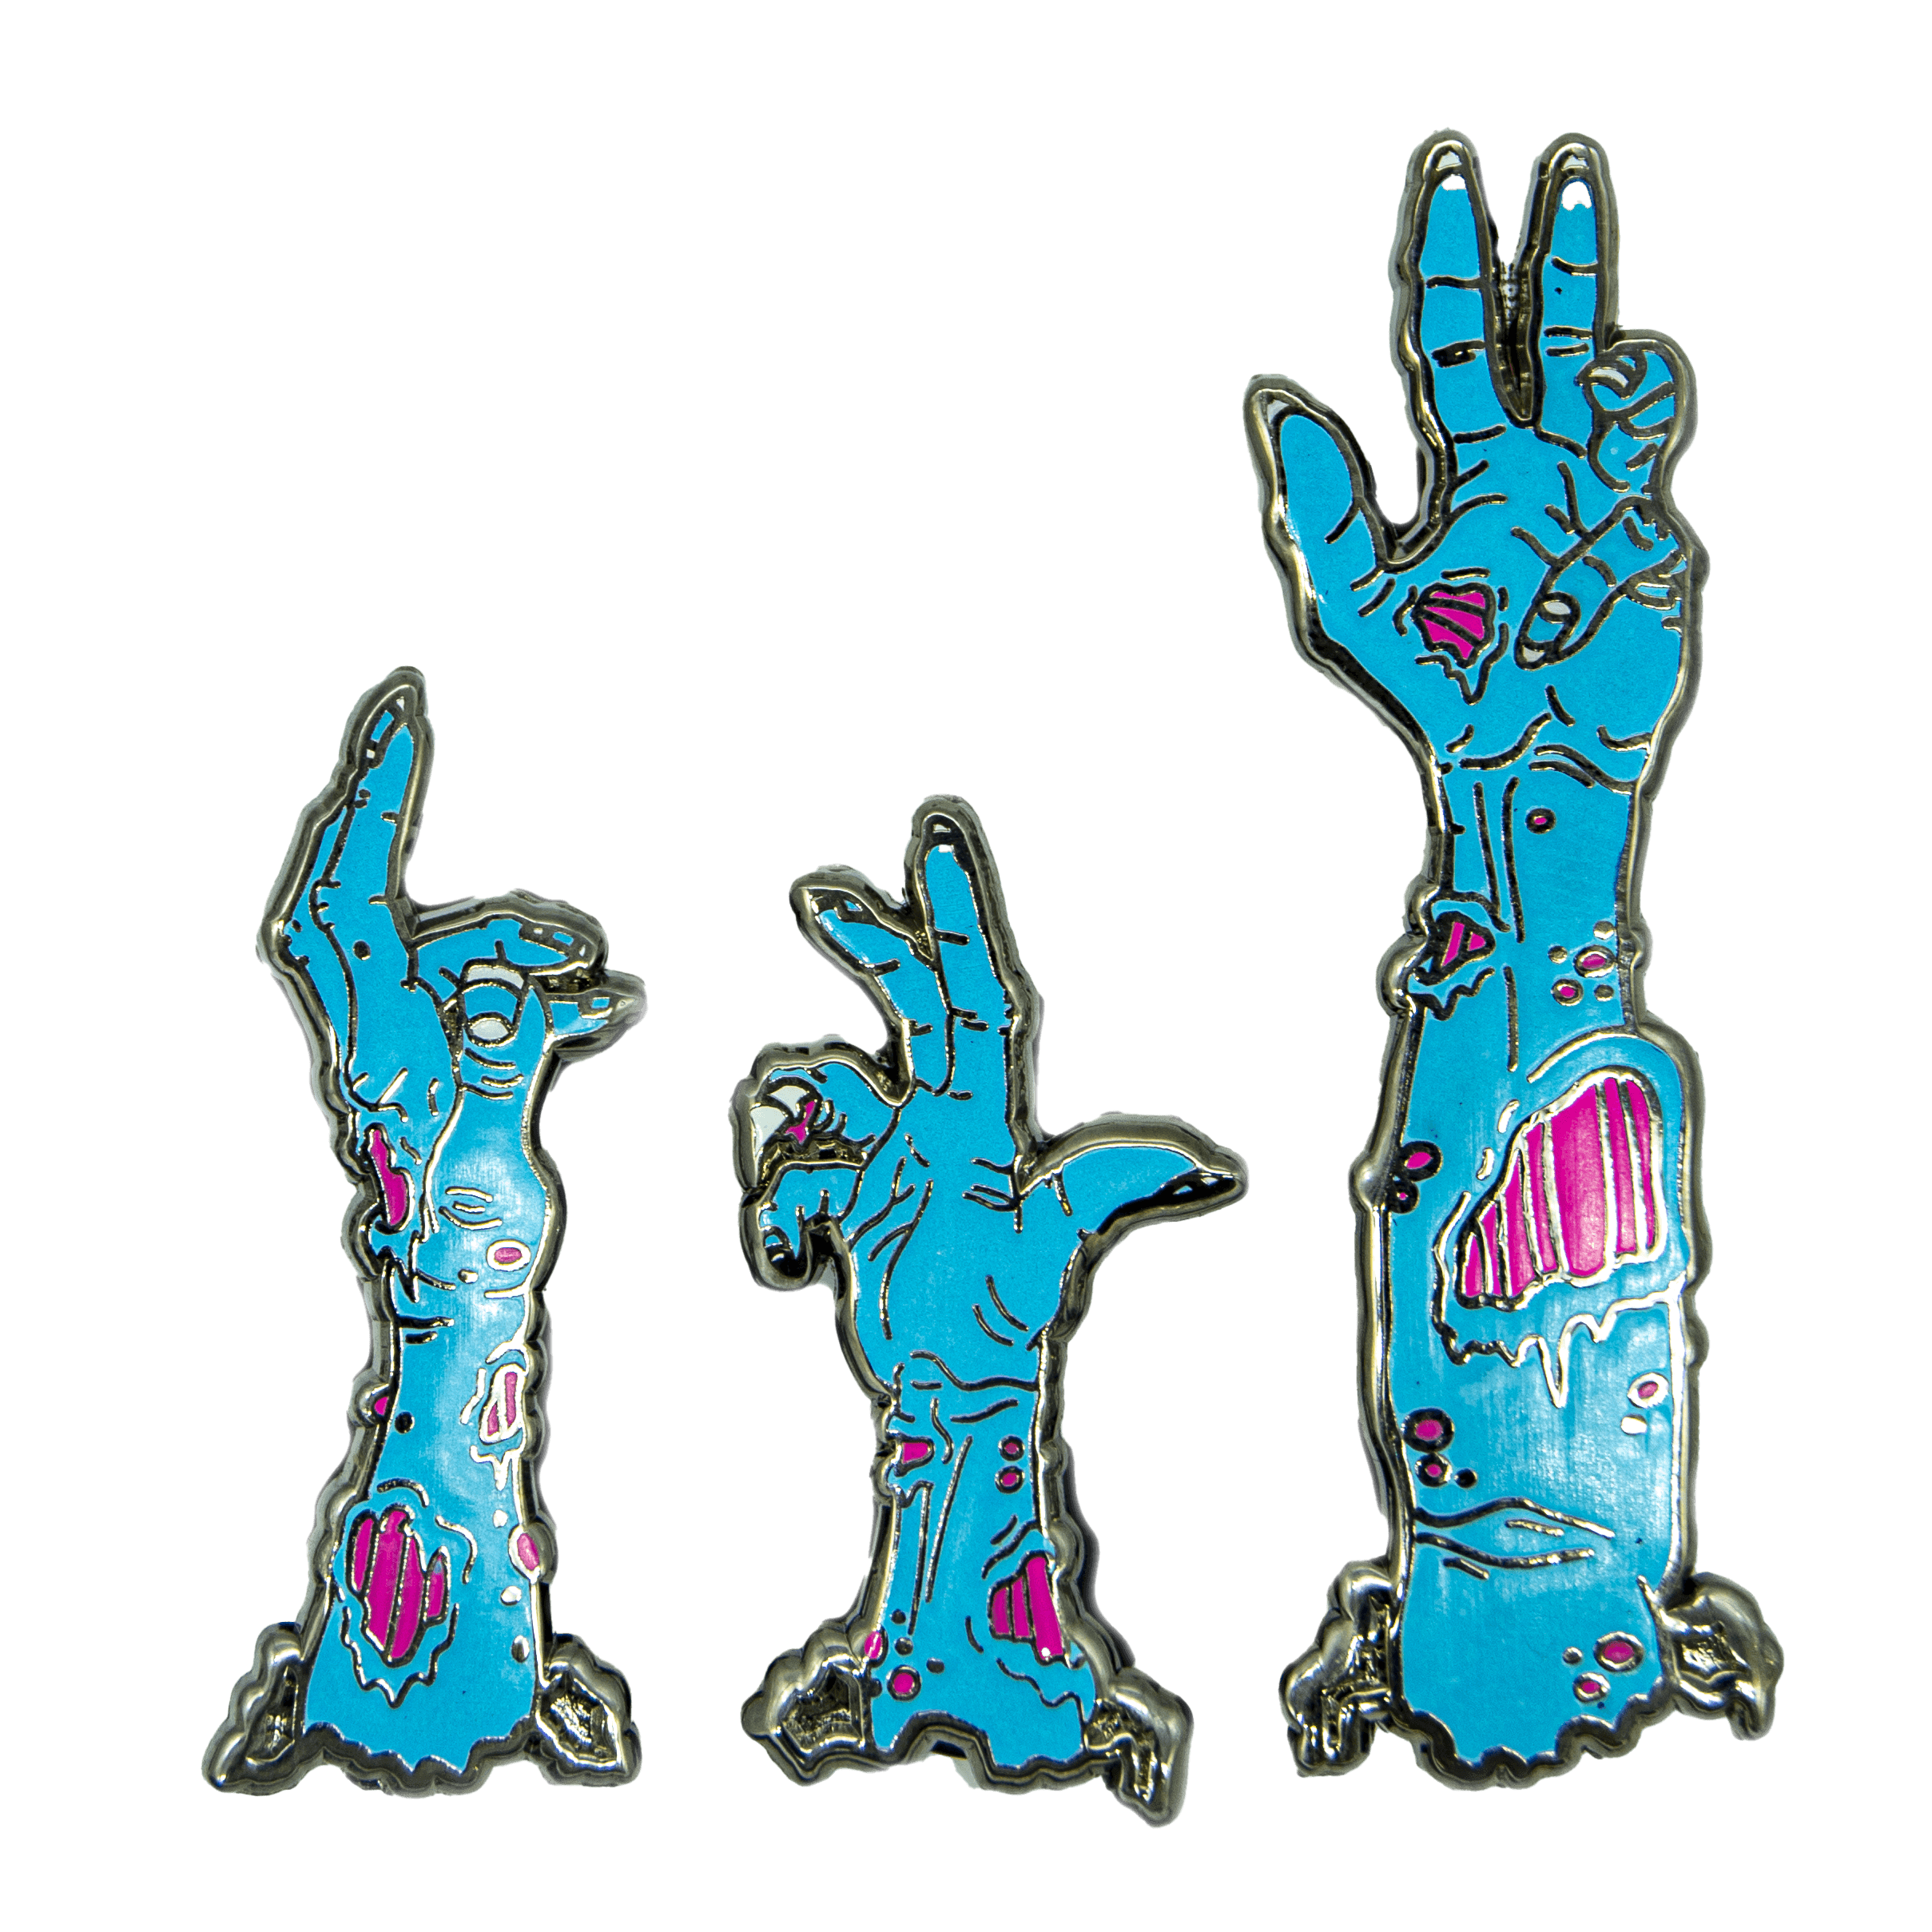 A set of three zombie arm pins, appearing to come up from the ground. Their skin is blue, and their flesh wounds are neon pink.